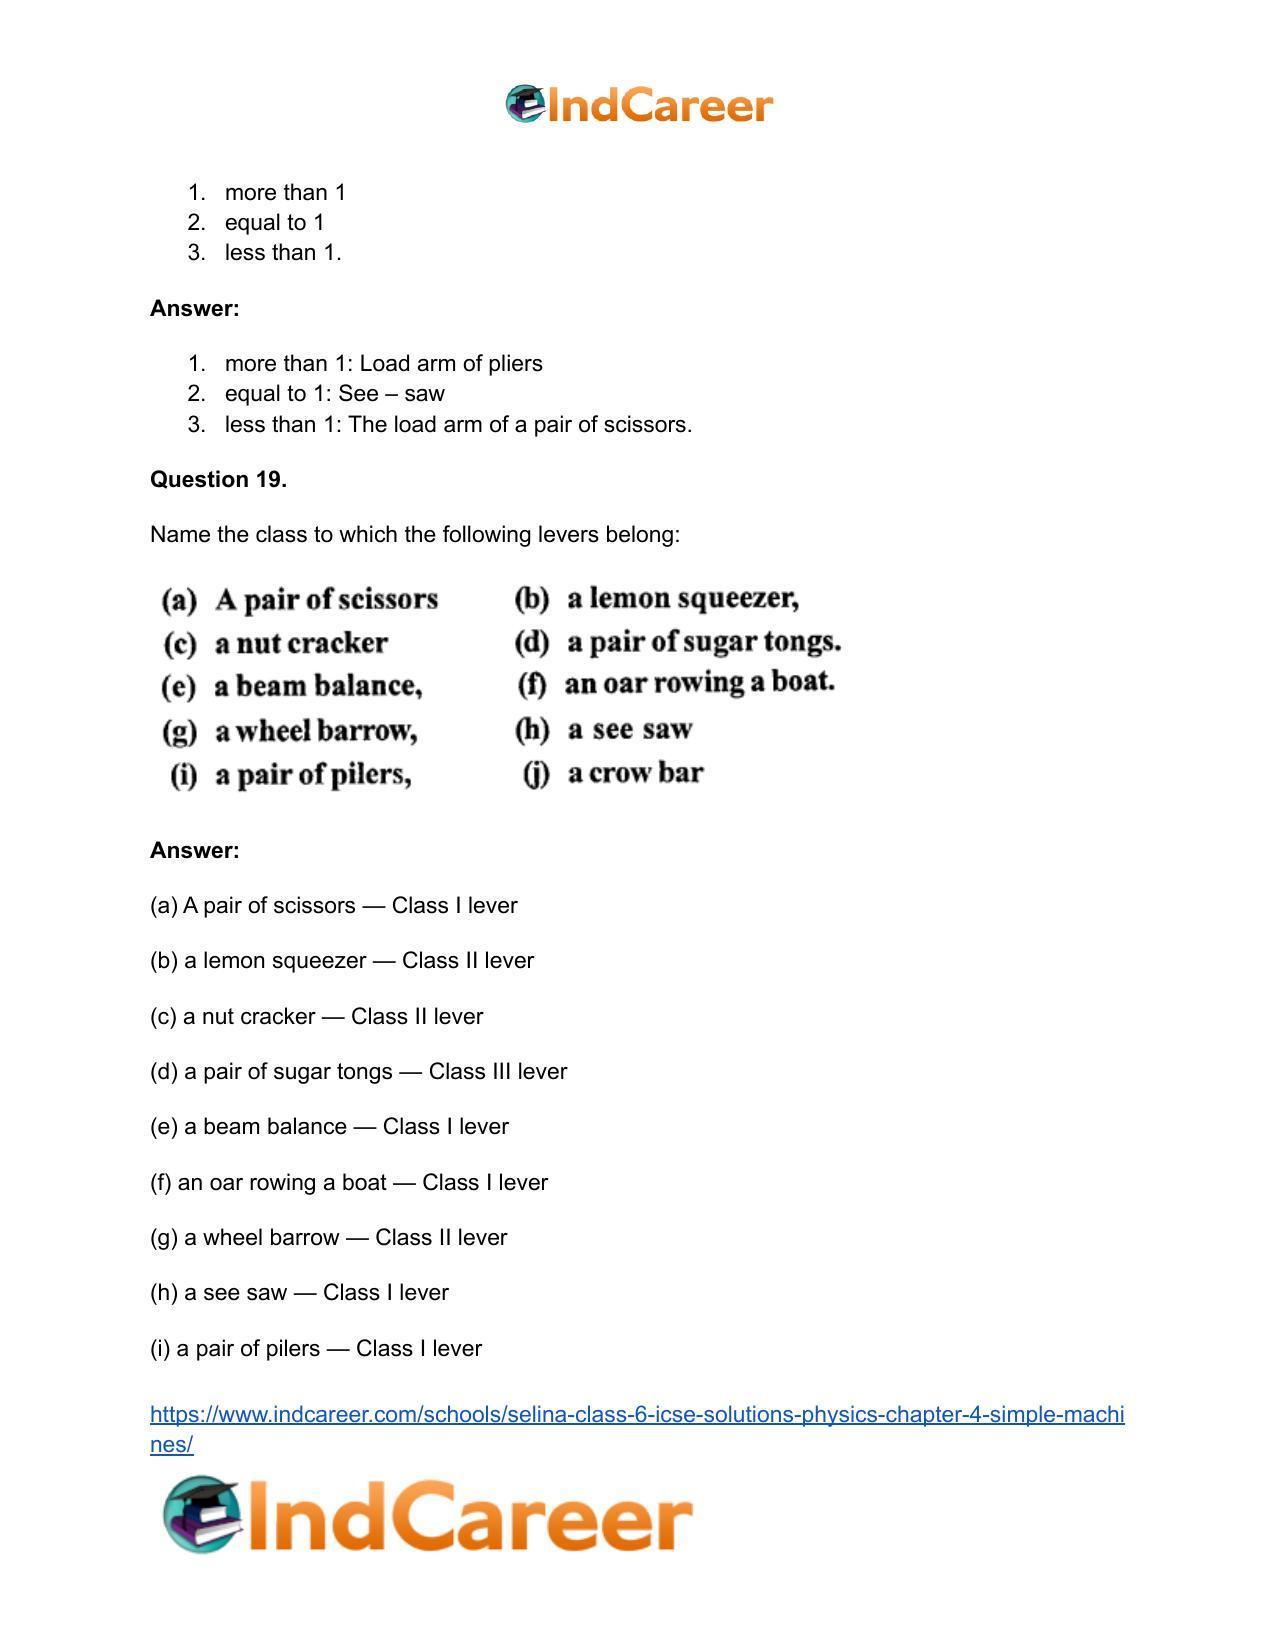 Selina Class 6 ICSE Solutions Physics : Chapter 4- Simple Machines - Page 10